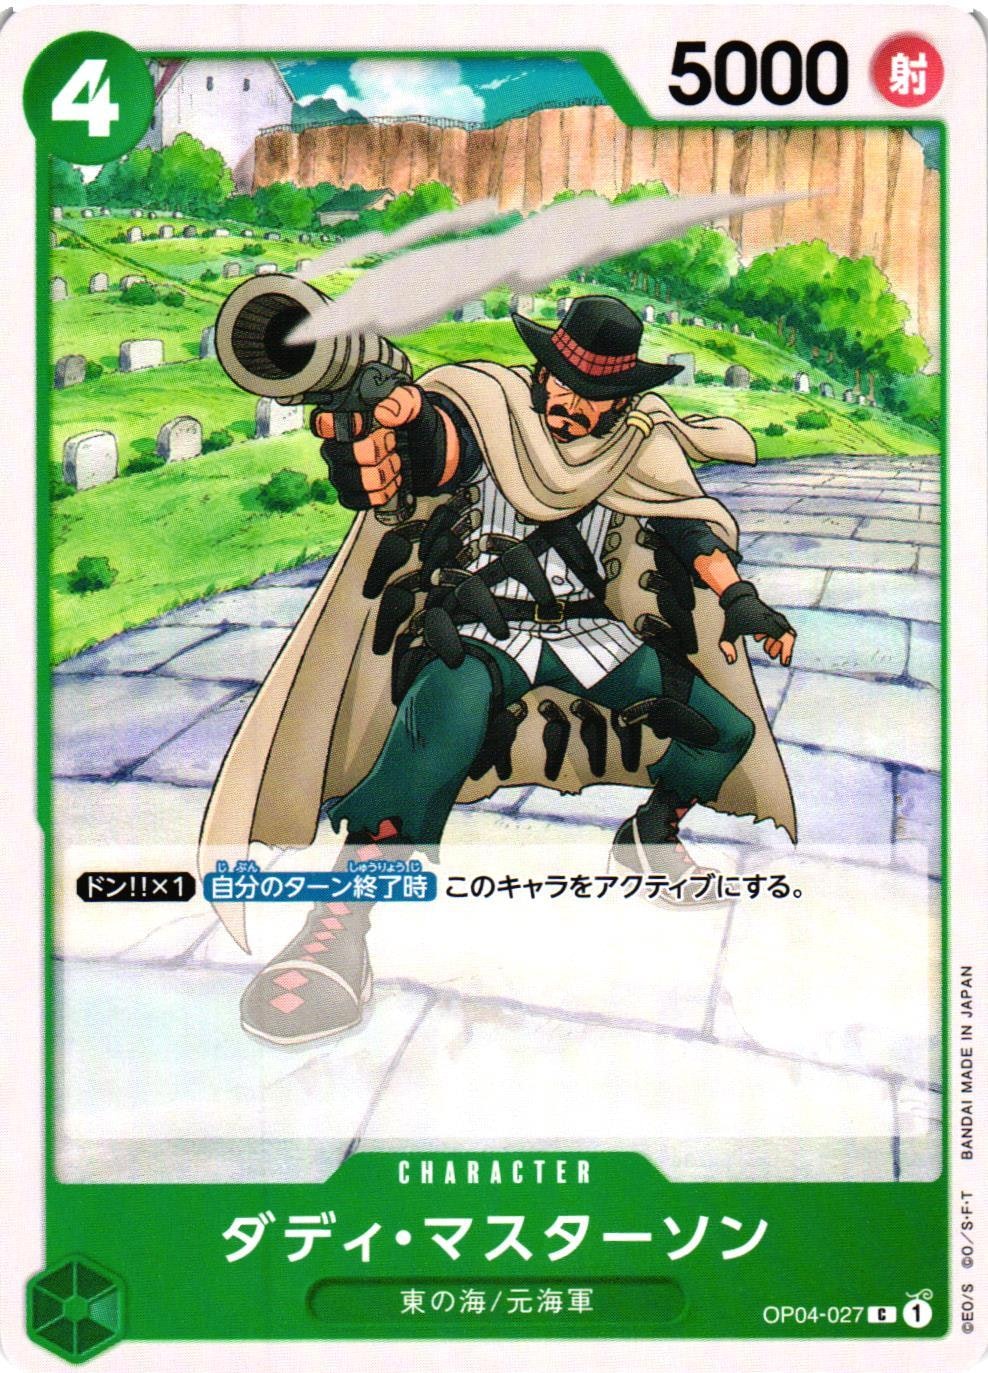 Daddy Masterson Common OP04-027 Kingdoms of Intrigue One Piece